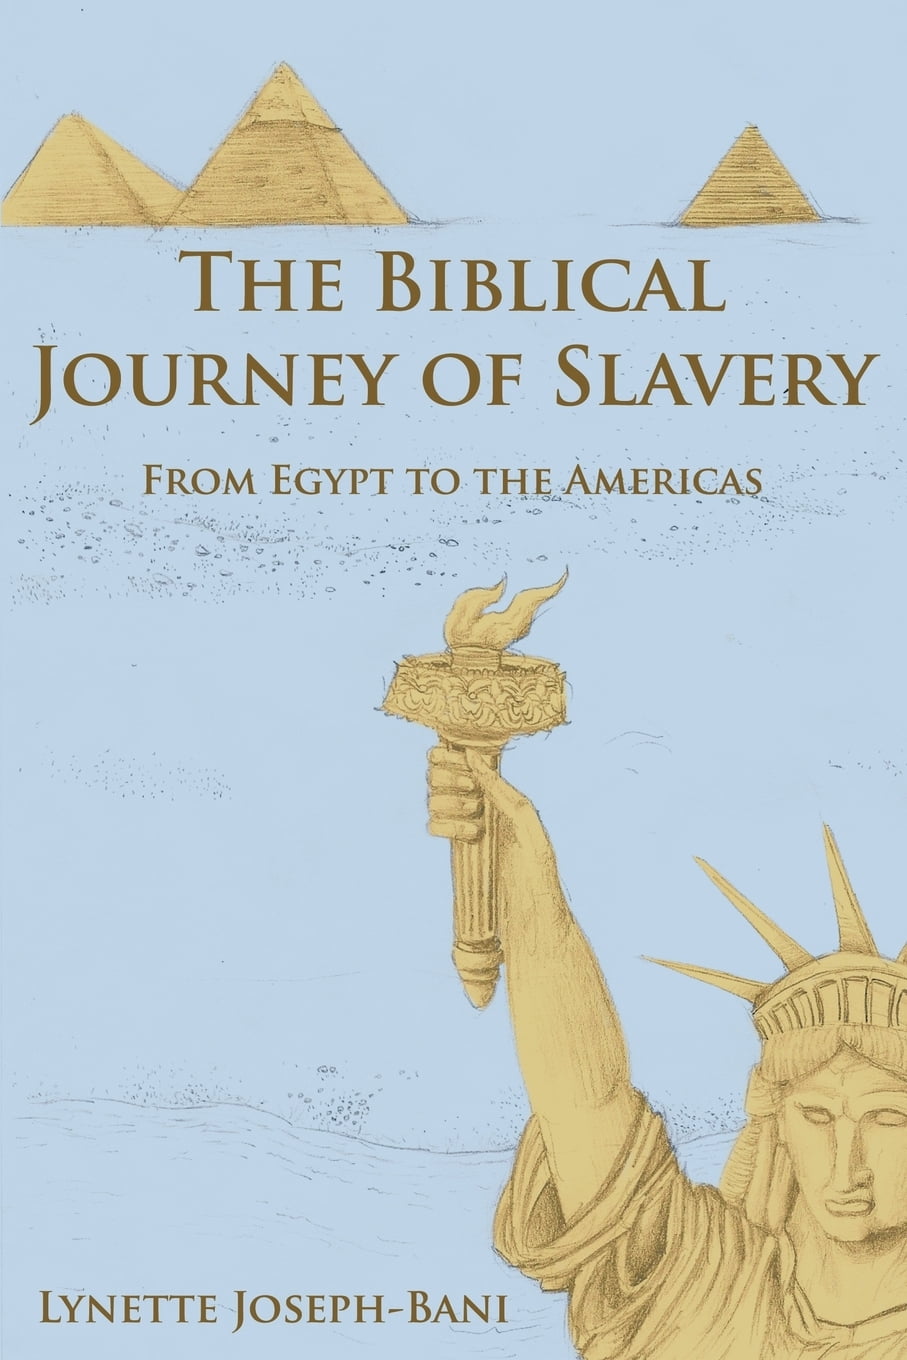 The Biblical Journey of Slavery From Egypt to the Americas